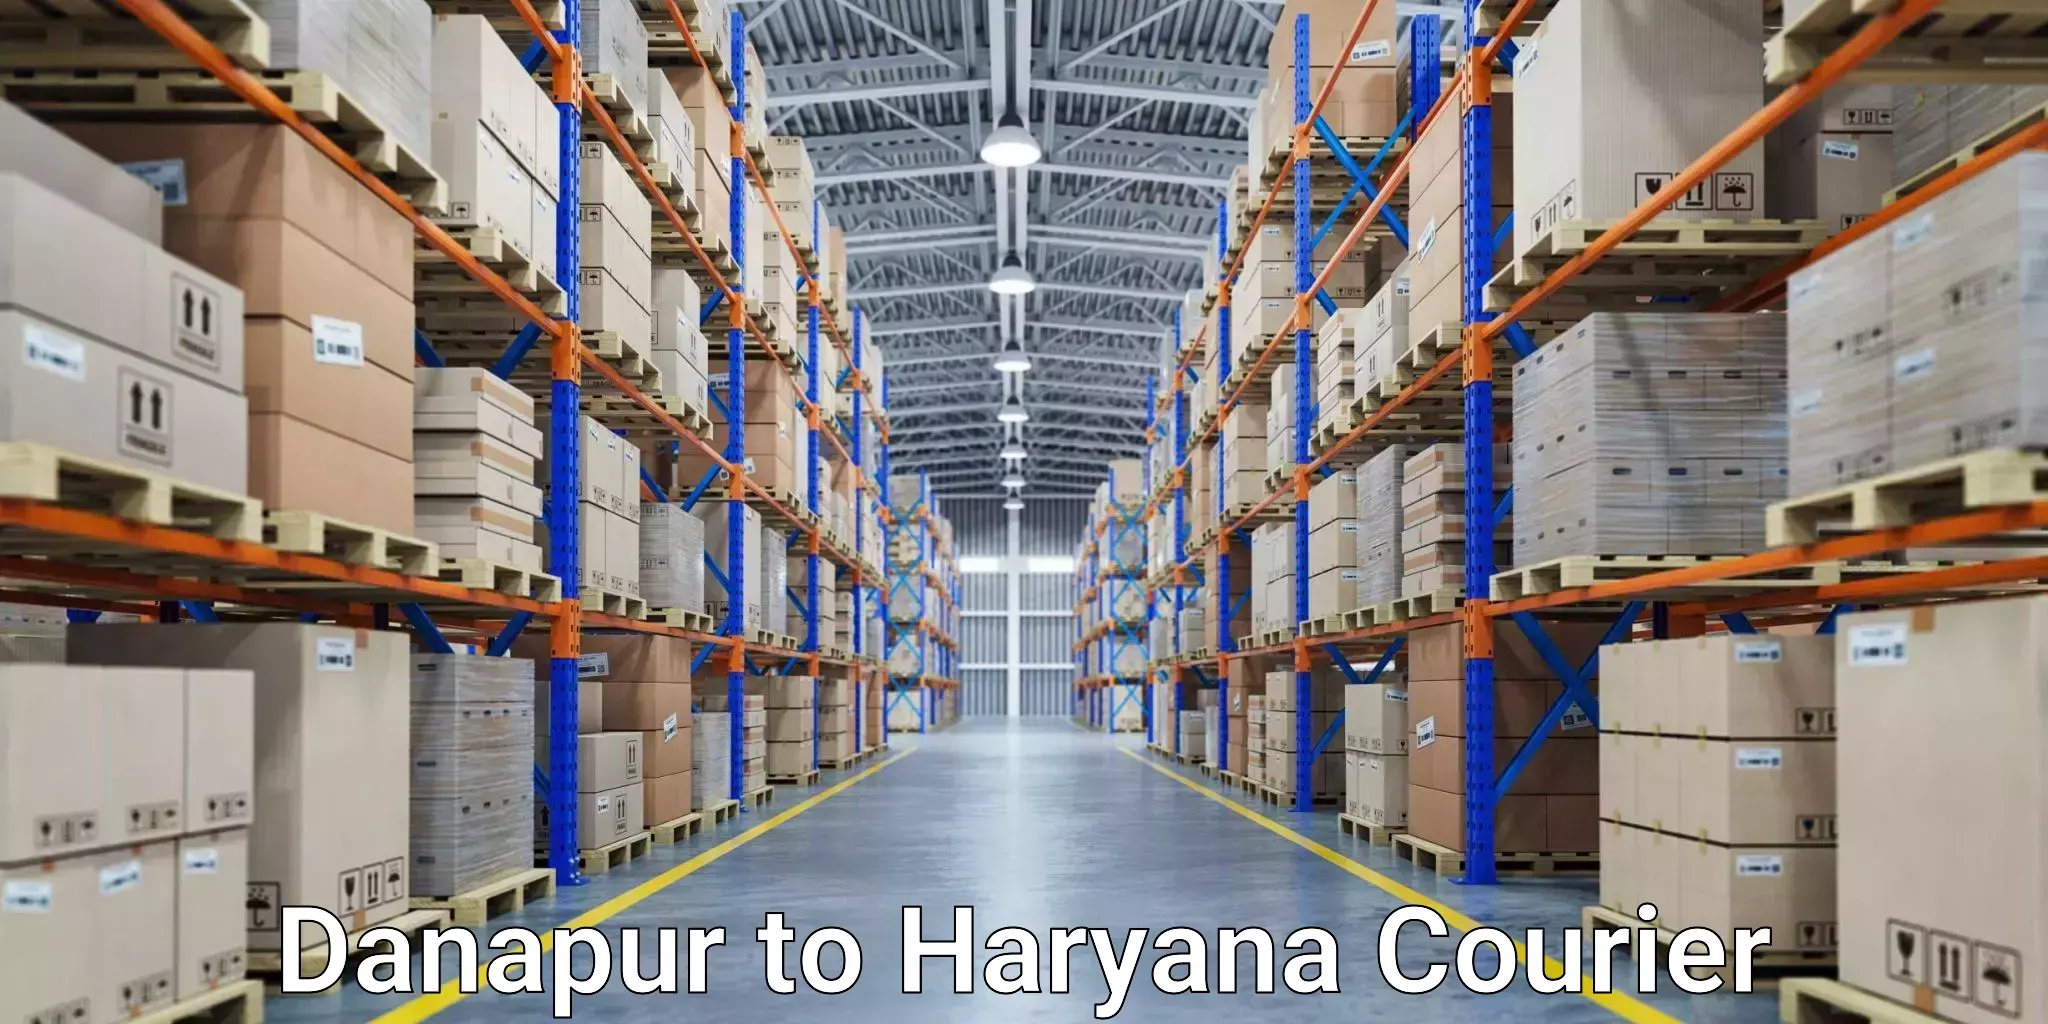 State-of-the-art courier technology Danapur to Chaudhary Charan Singh Haryana Agricultural University Hisar